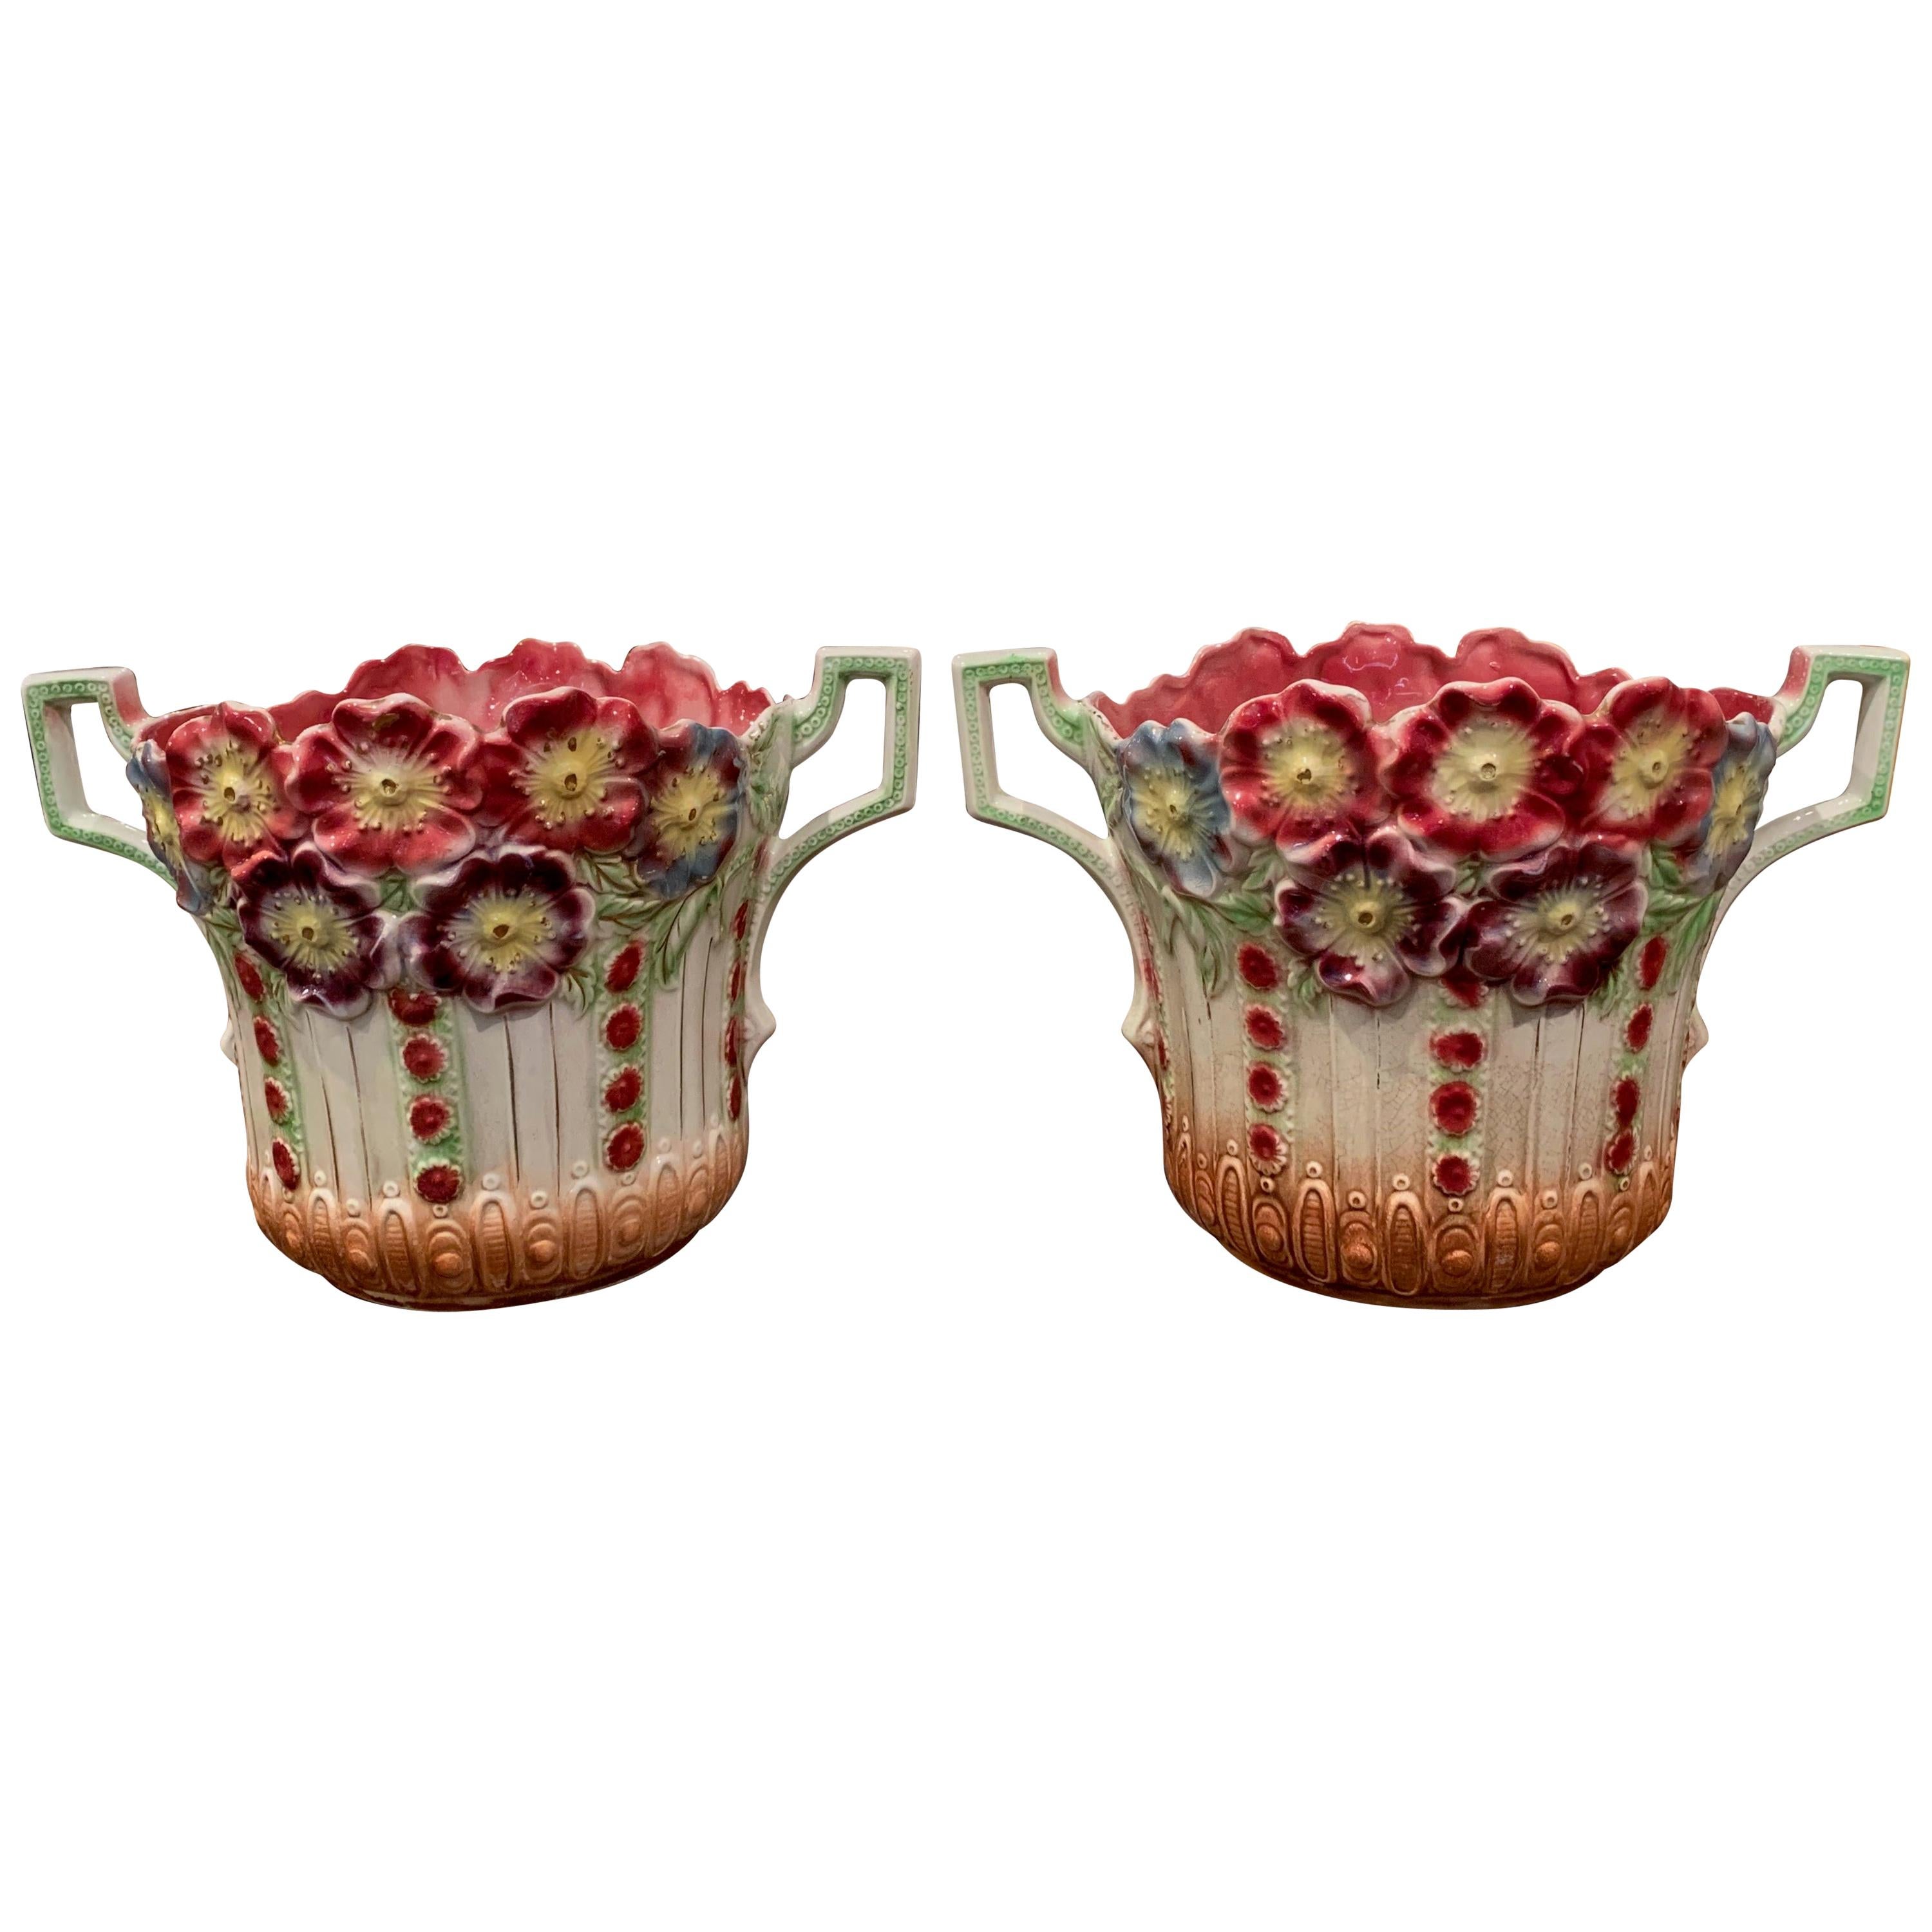 Pair of 19th Century French Barbotine Cachepots with Floral Motifs by Onnaing